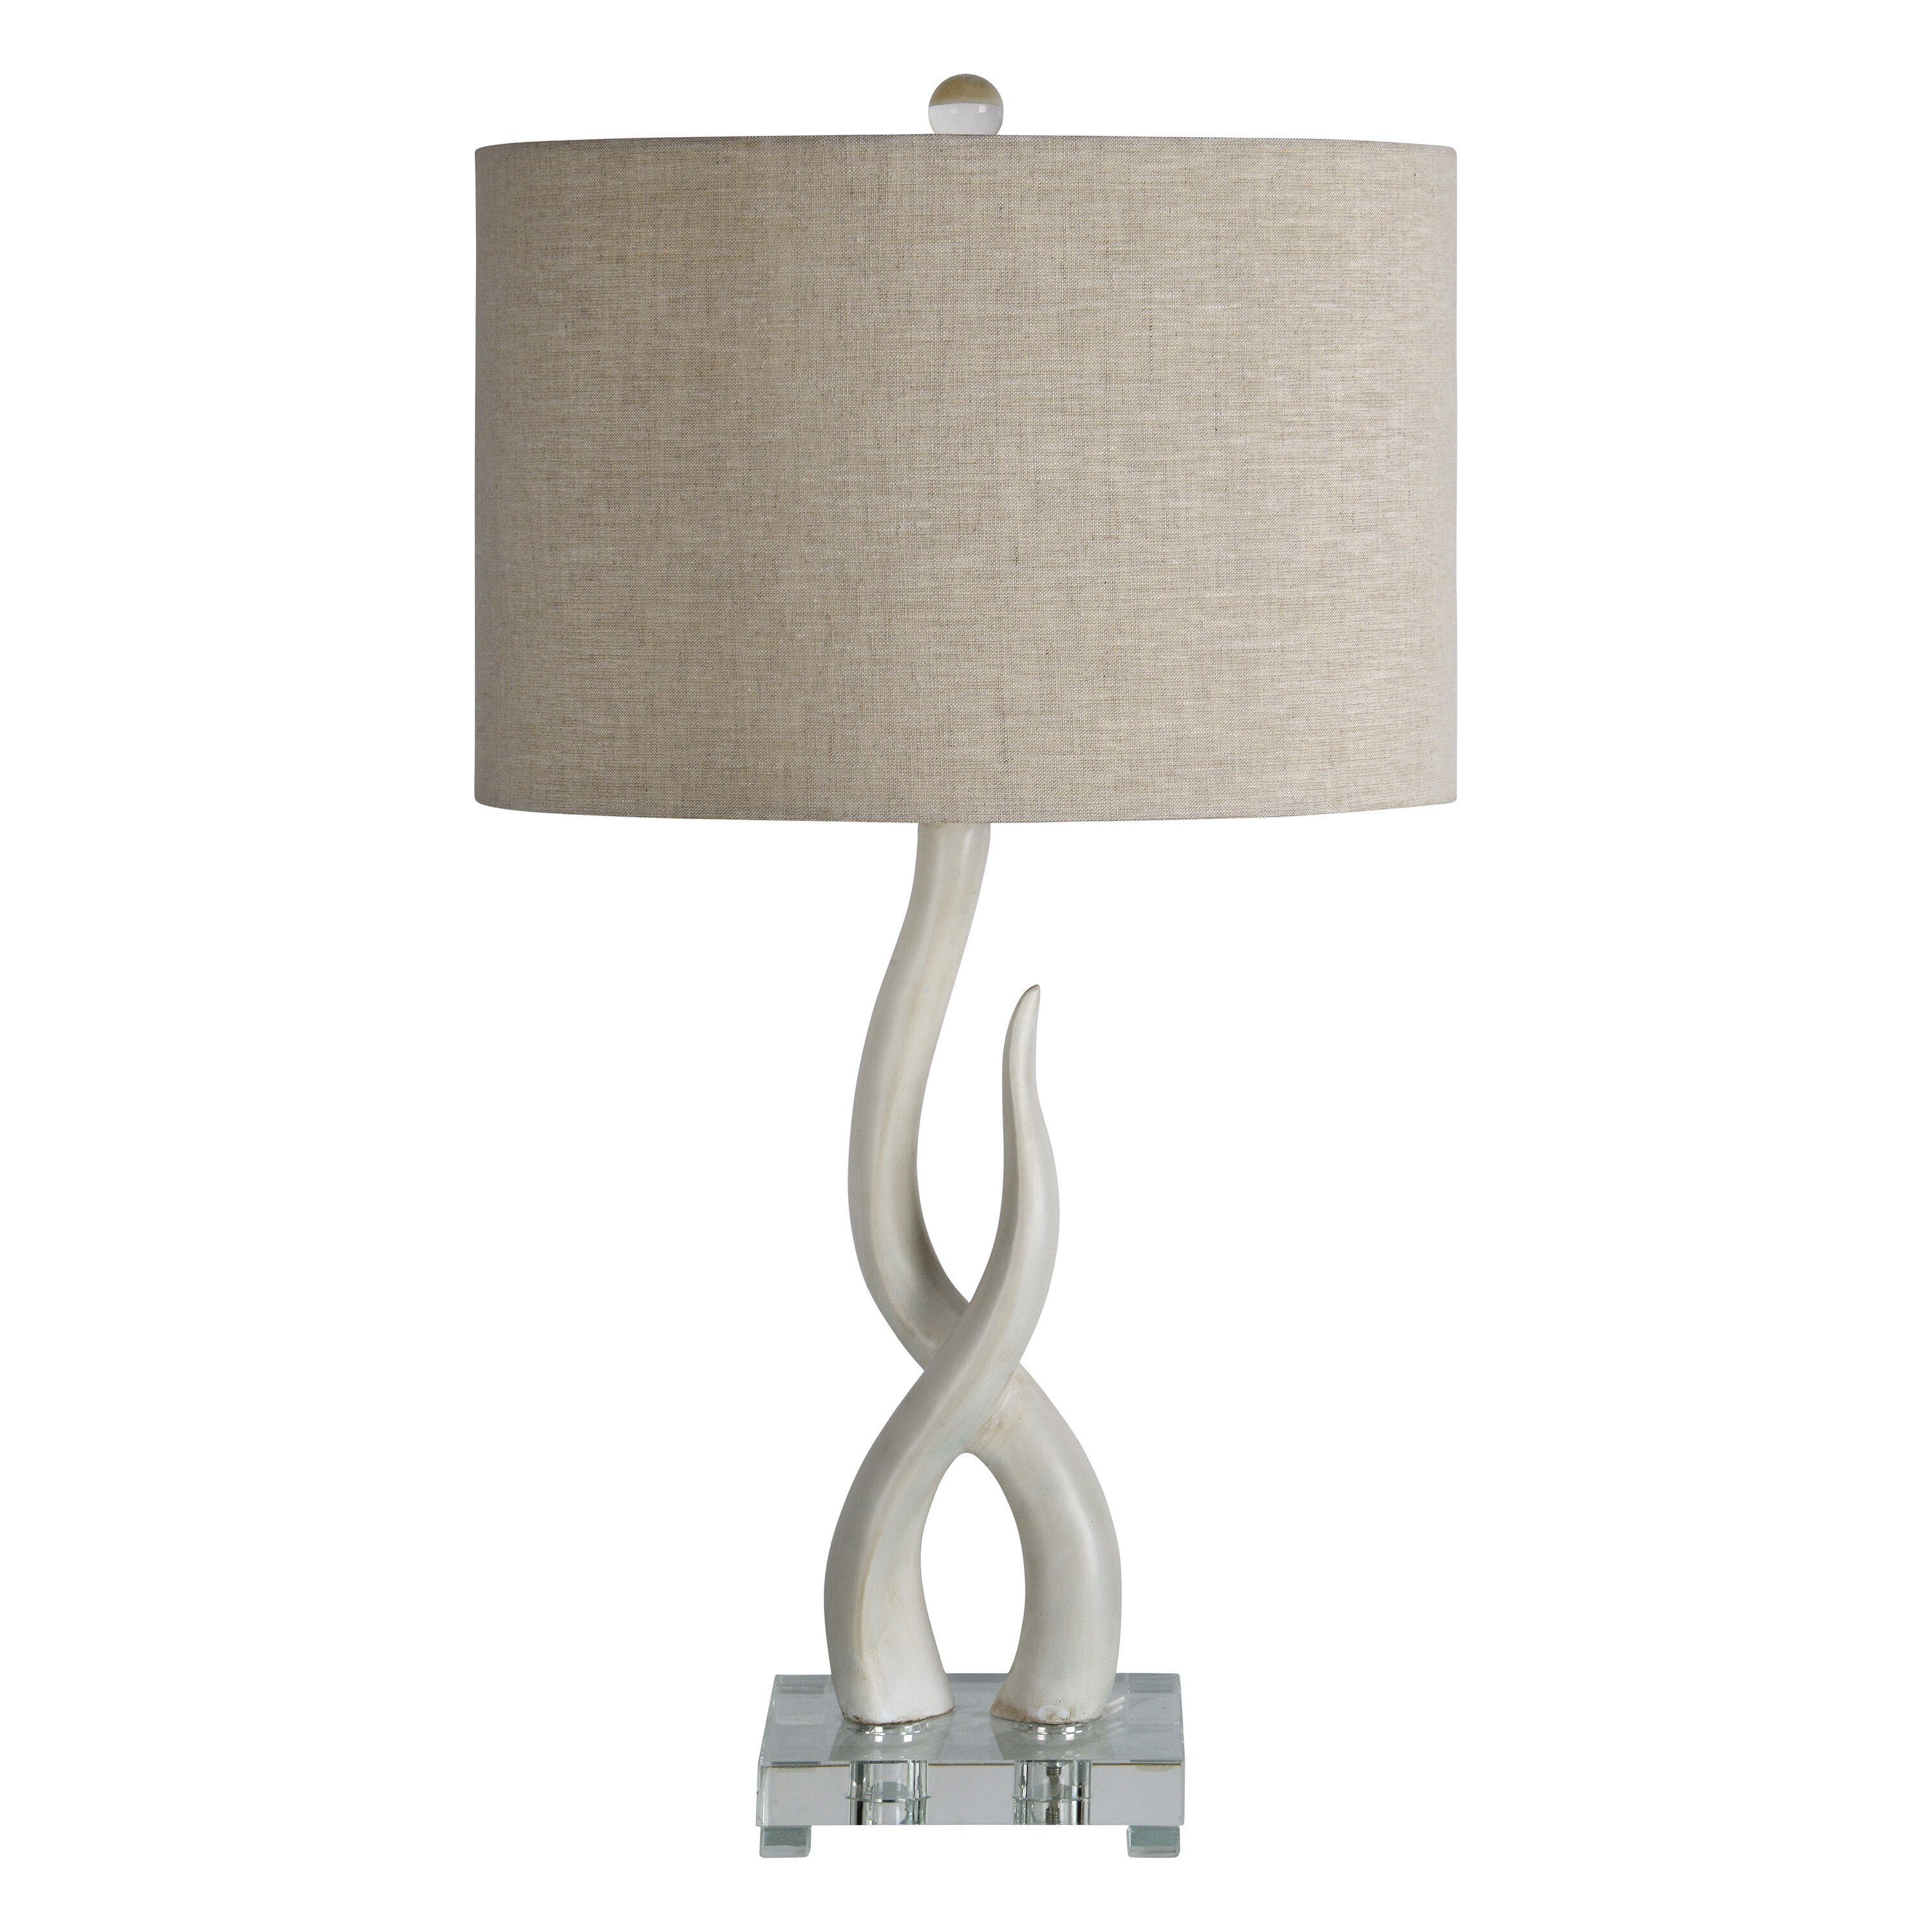 Ren Wil Apparition 30" Table Lamp